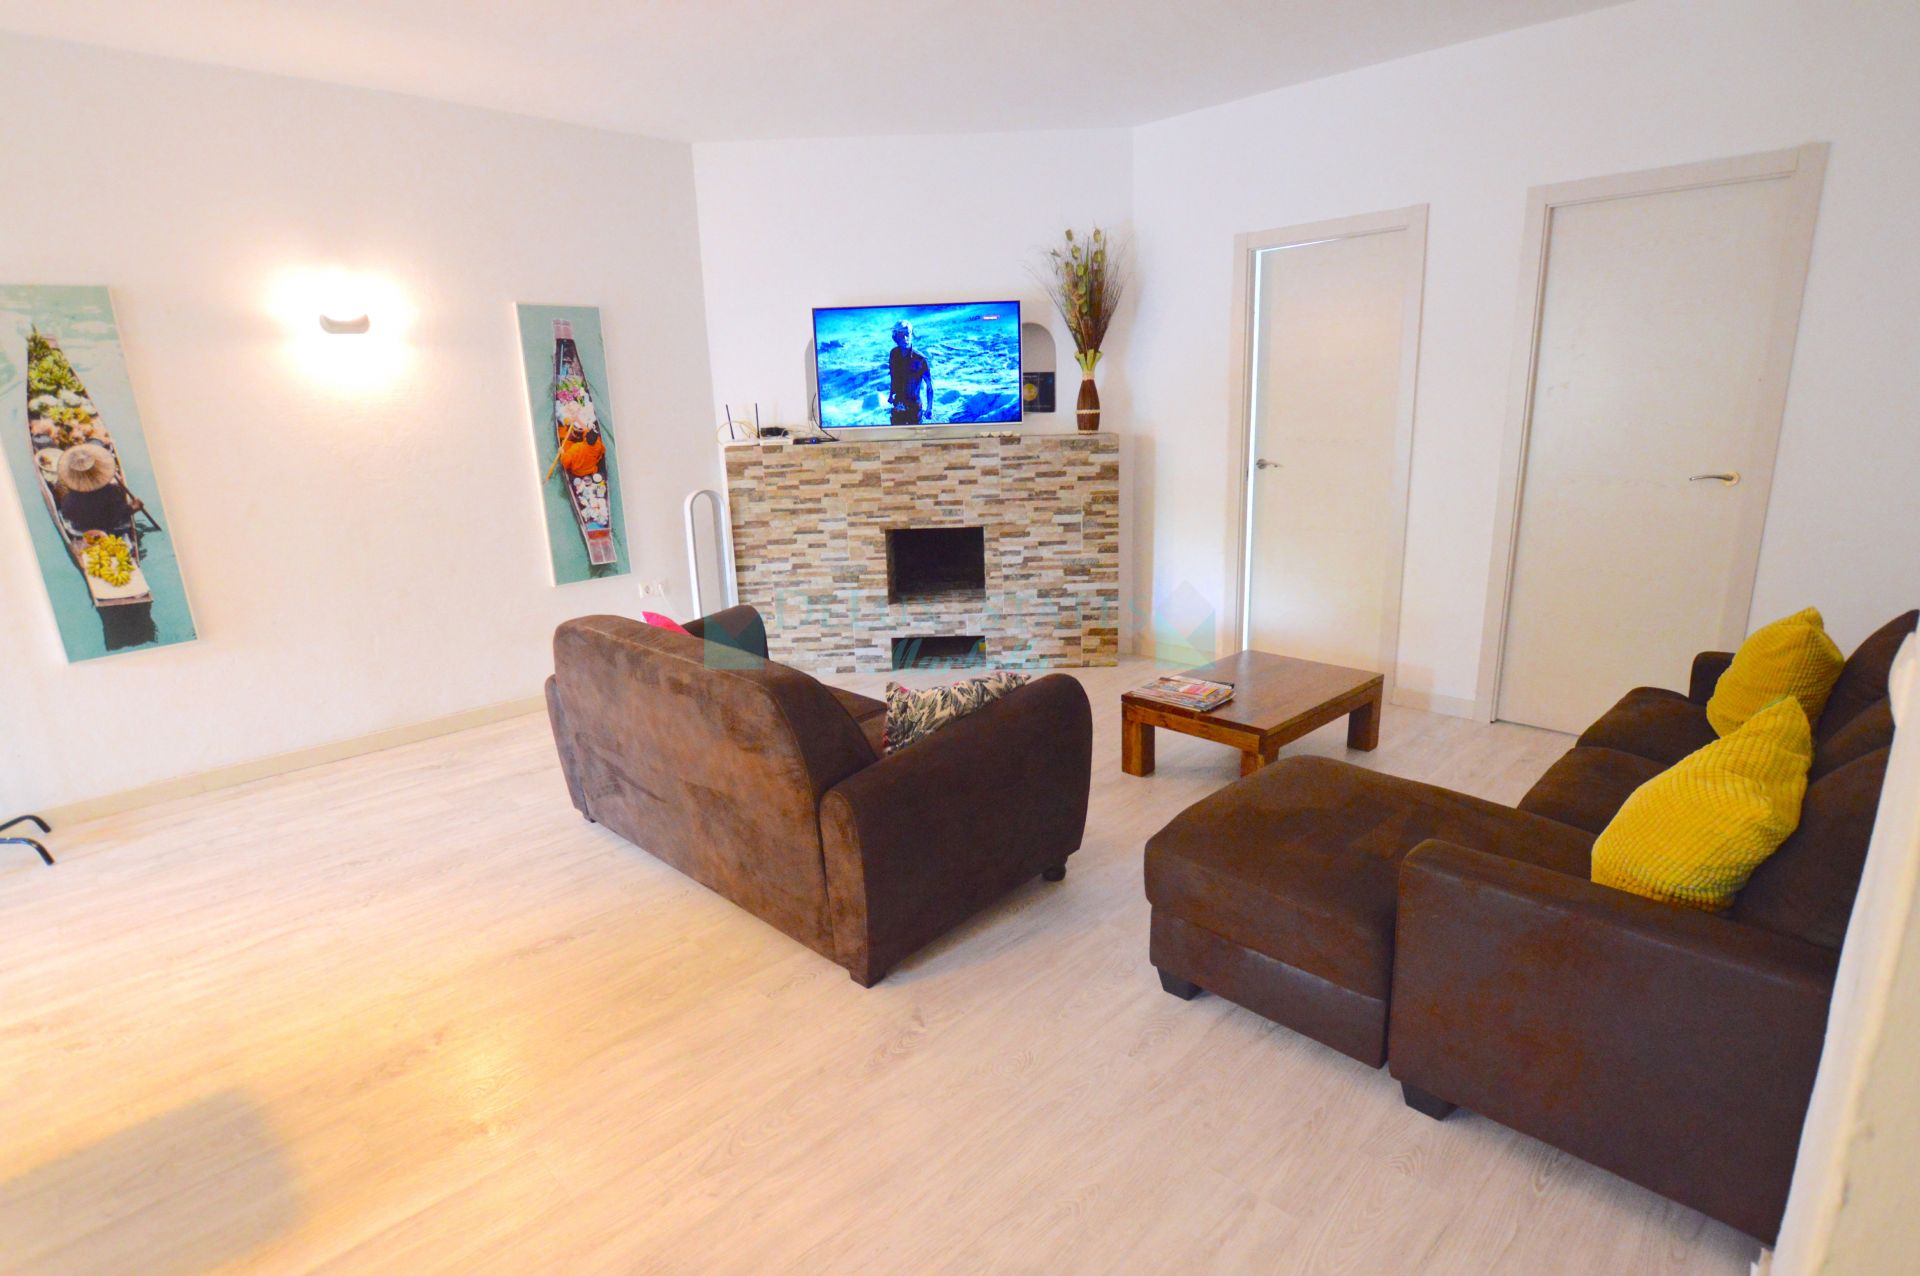 Photo Gallery - Investment apartment for sale in marina (Puerto Banus)